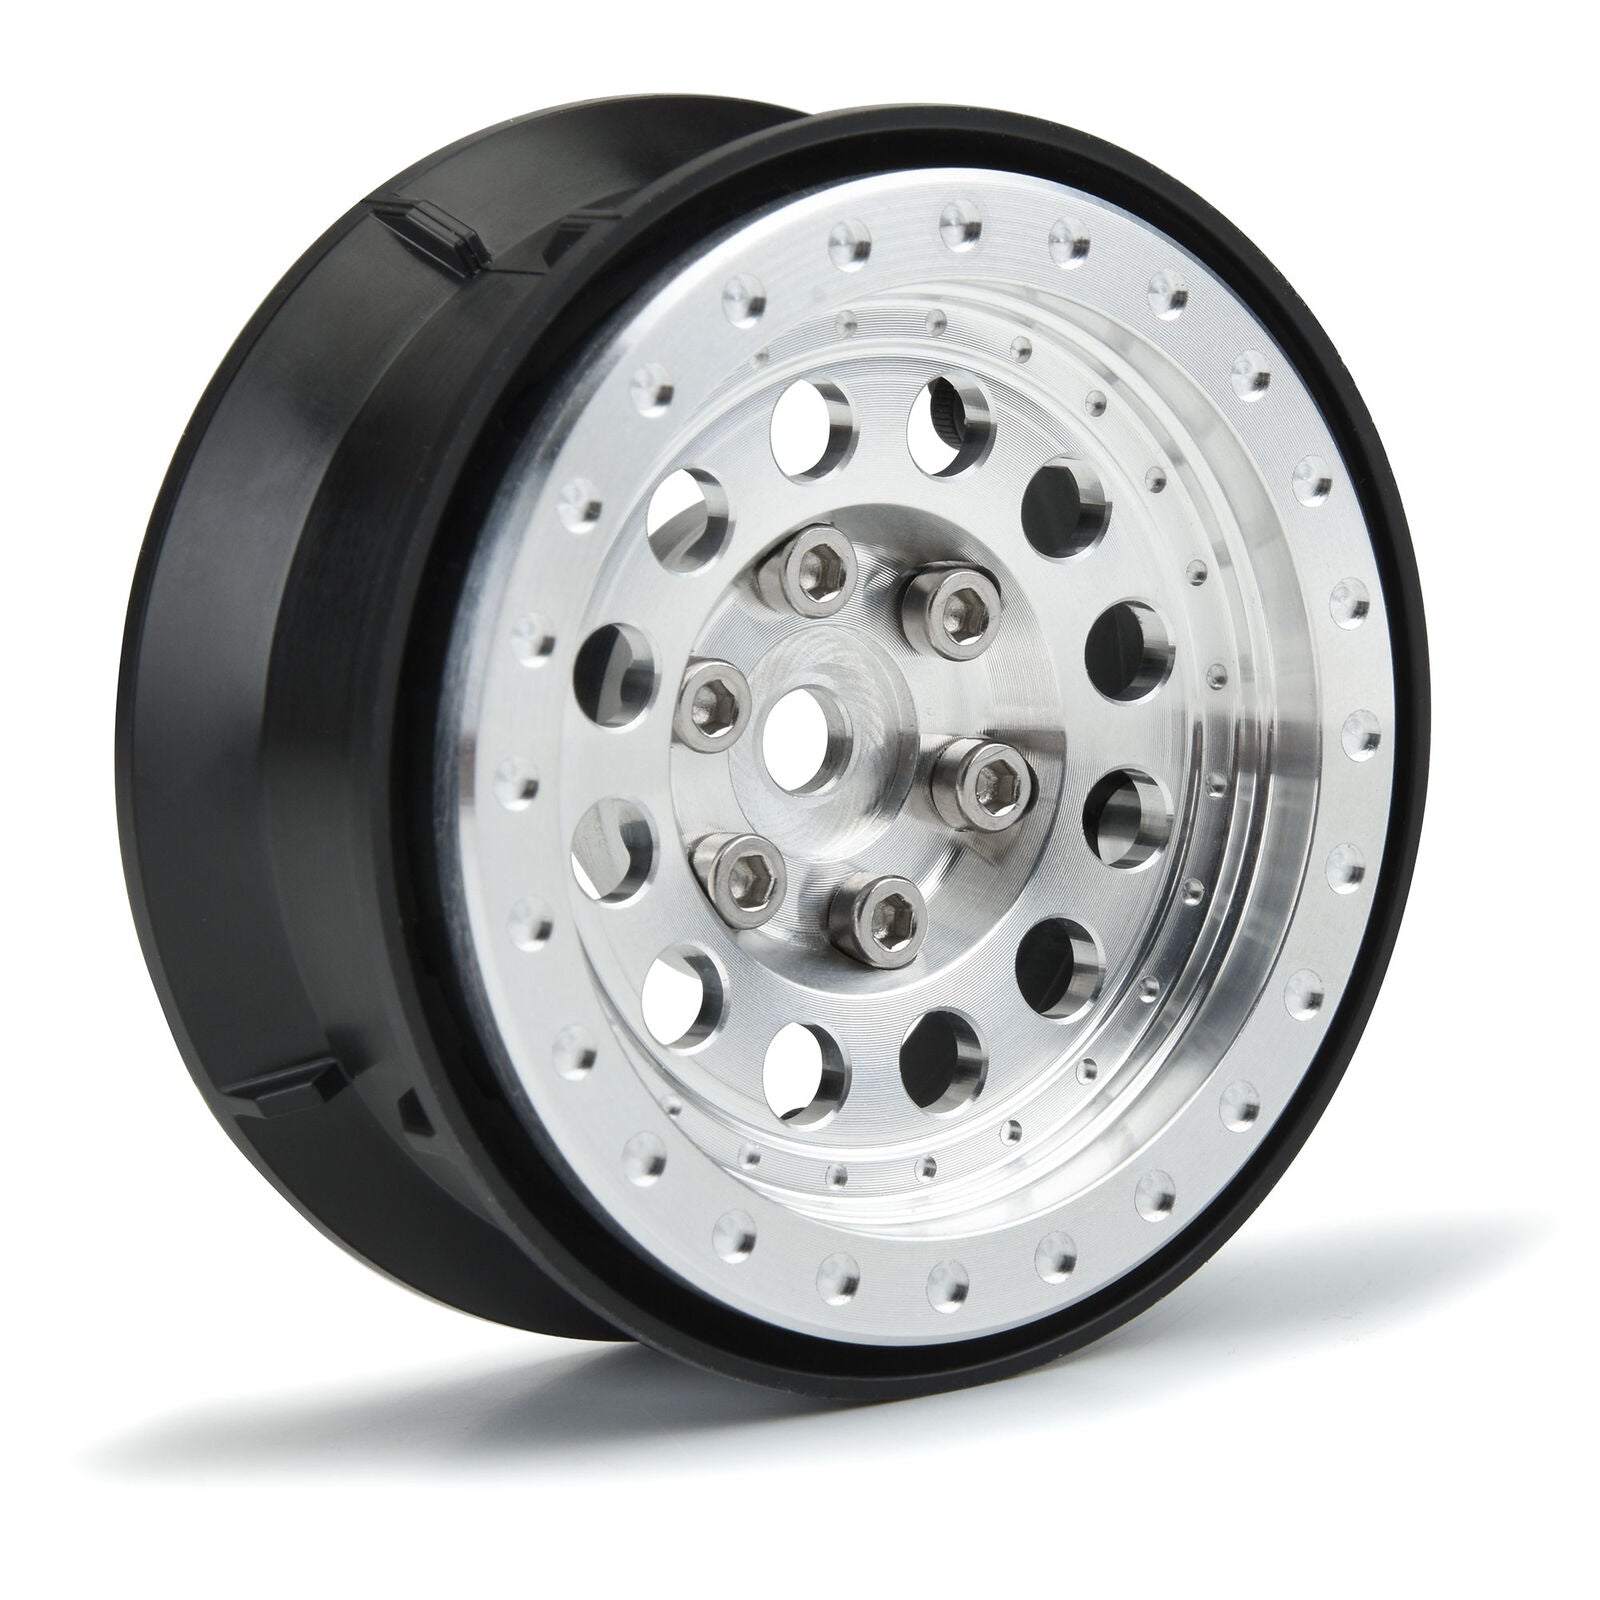 PROLINE 2781-00 Rock Shooter 1.9" Aluminum Composite Internal Bead-Loc Wheels for Rock Crawlers Front or Rear